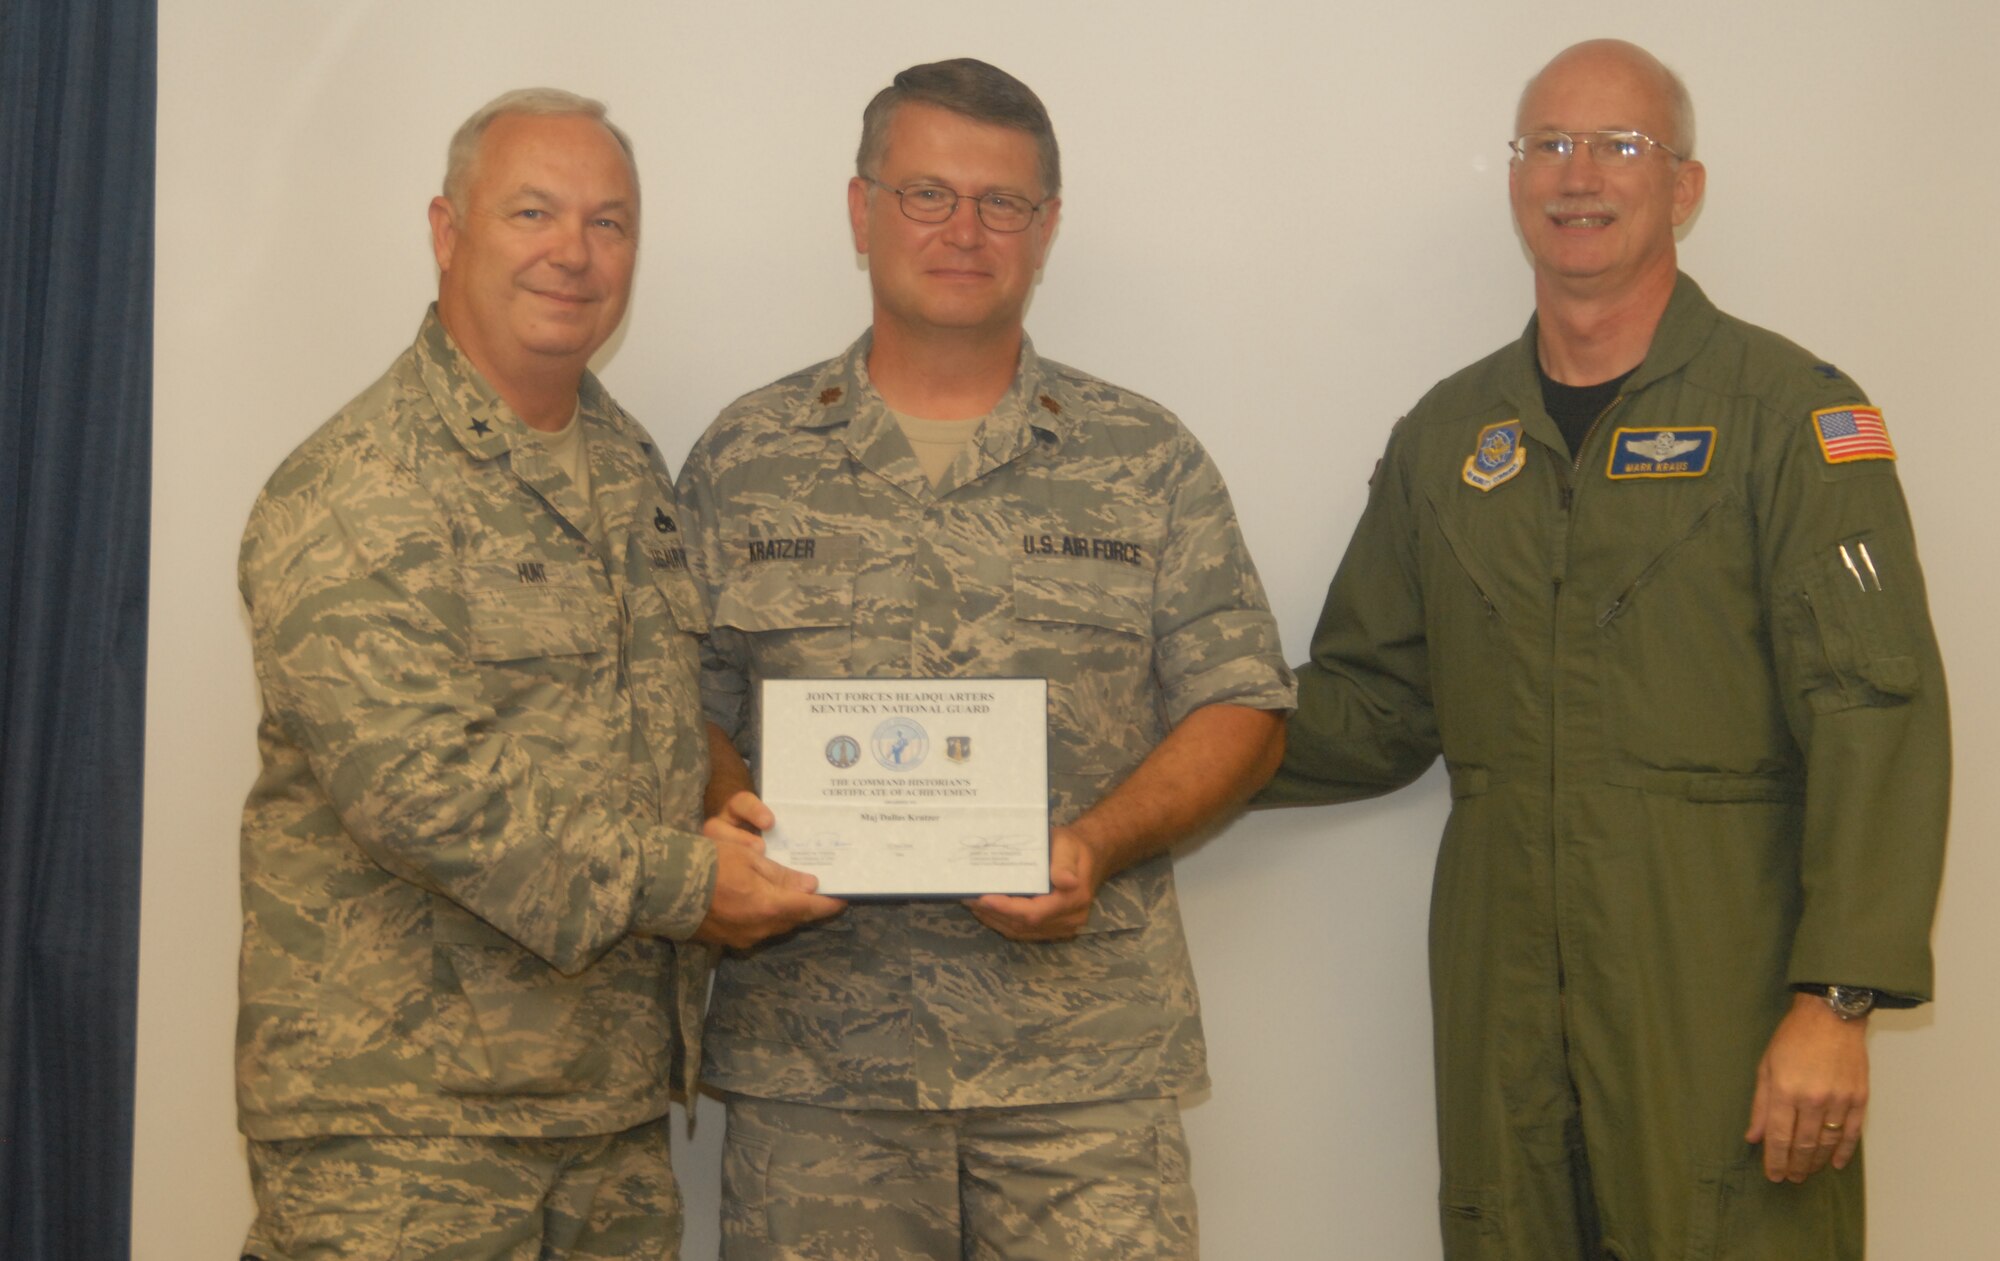 Maj. Dallas Kratzer receives the Historian’s Certificate of Achievement, presented by Brig. Gen. Howard P. Hunt, III, Kentucky Air National Guard Assistant Adjutant General, and Col. Mark R. Kraus, 123rd Airlift Wing Commander - photo by Tech. Sgt. Philip S. Speck